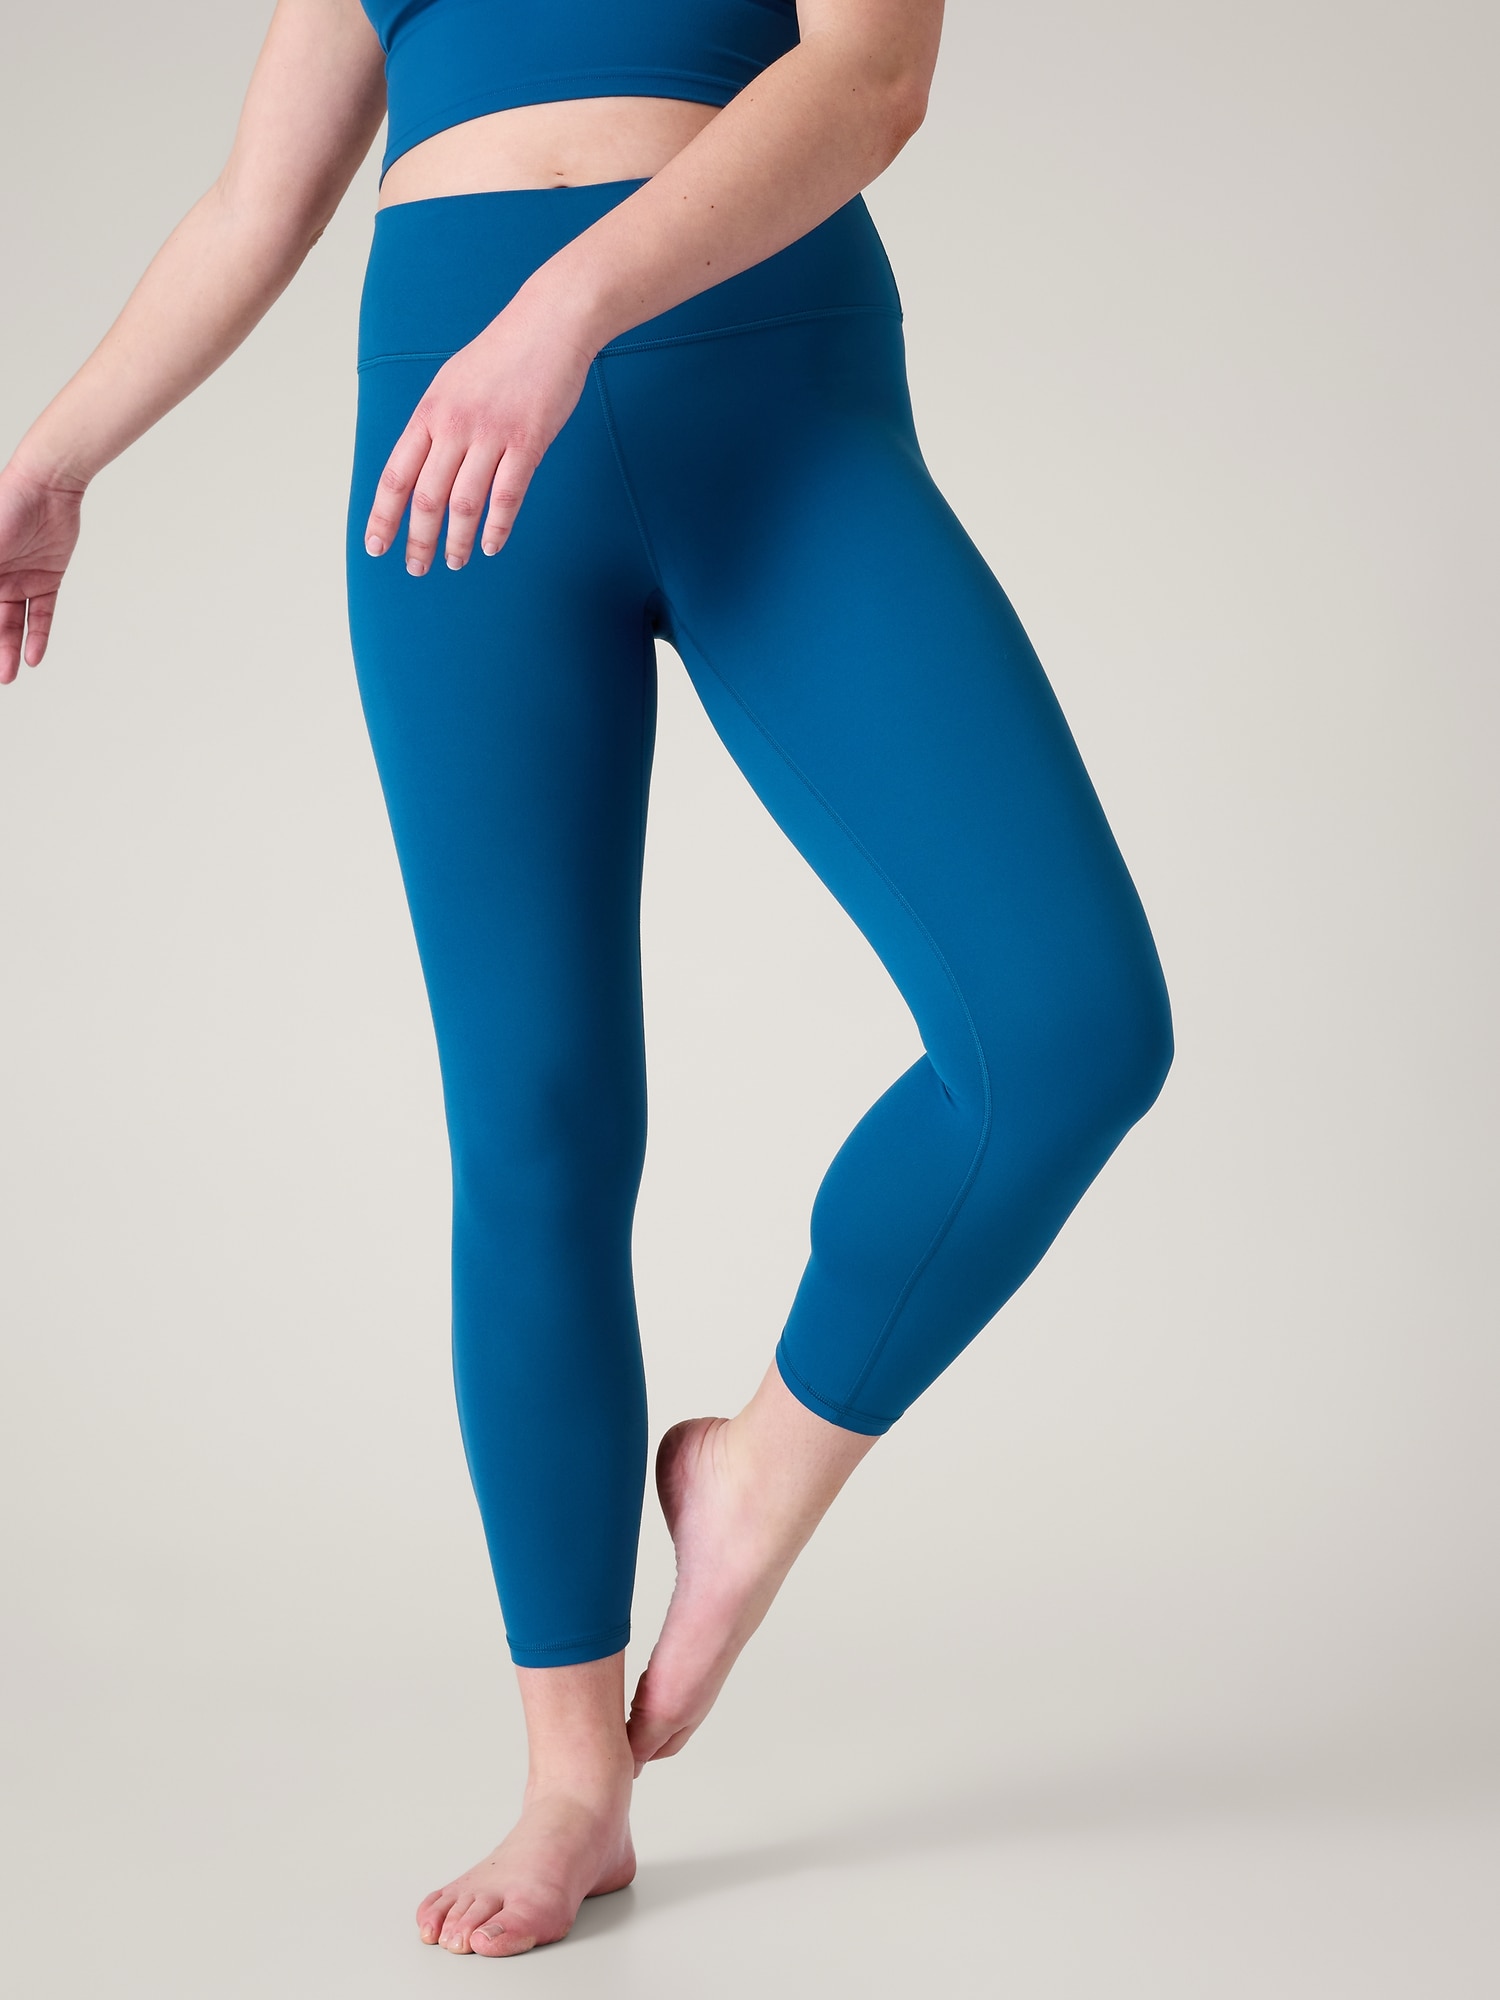 Sweaty Betty Athlete 7/8 Crop Seamless Workout Leggings in Smoked Blue Marl  NWT Size XS - $65 New With Tags - From Tinnie